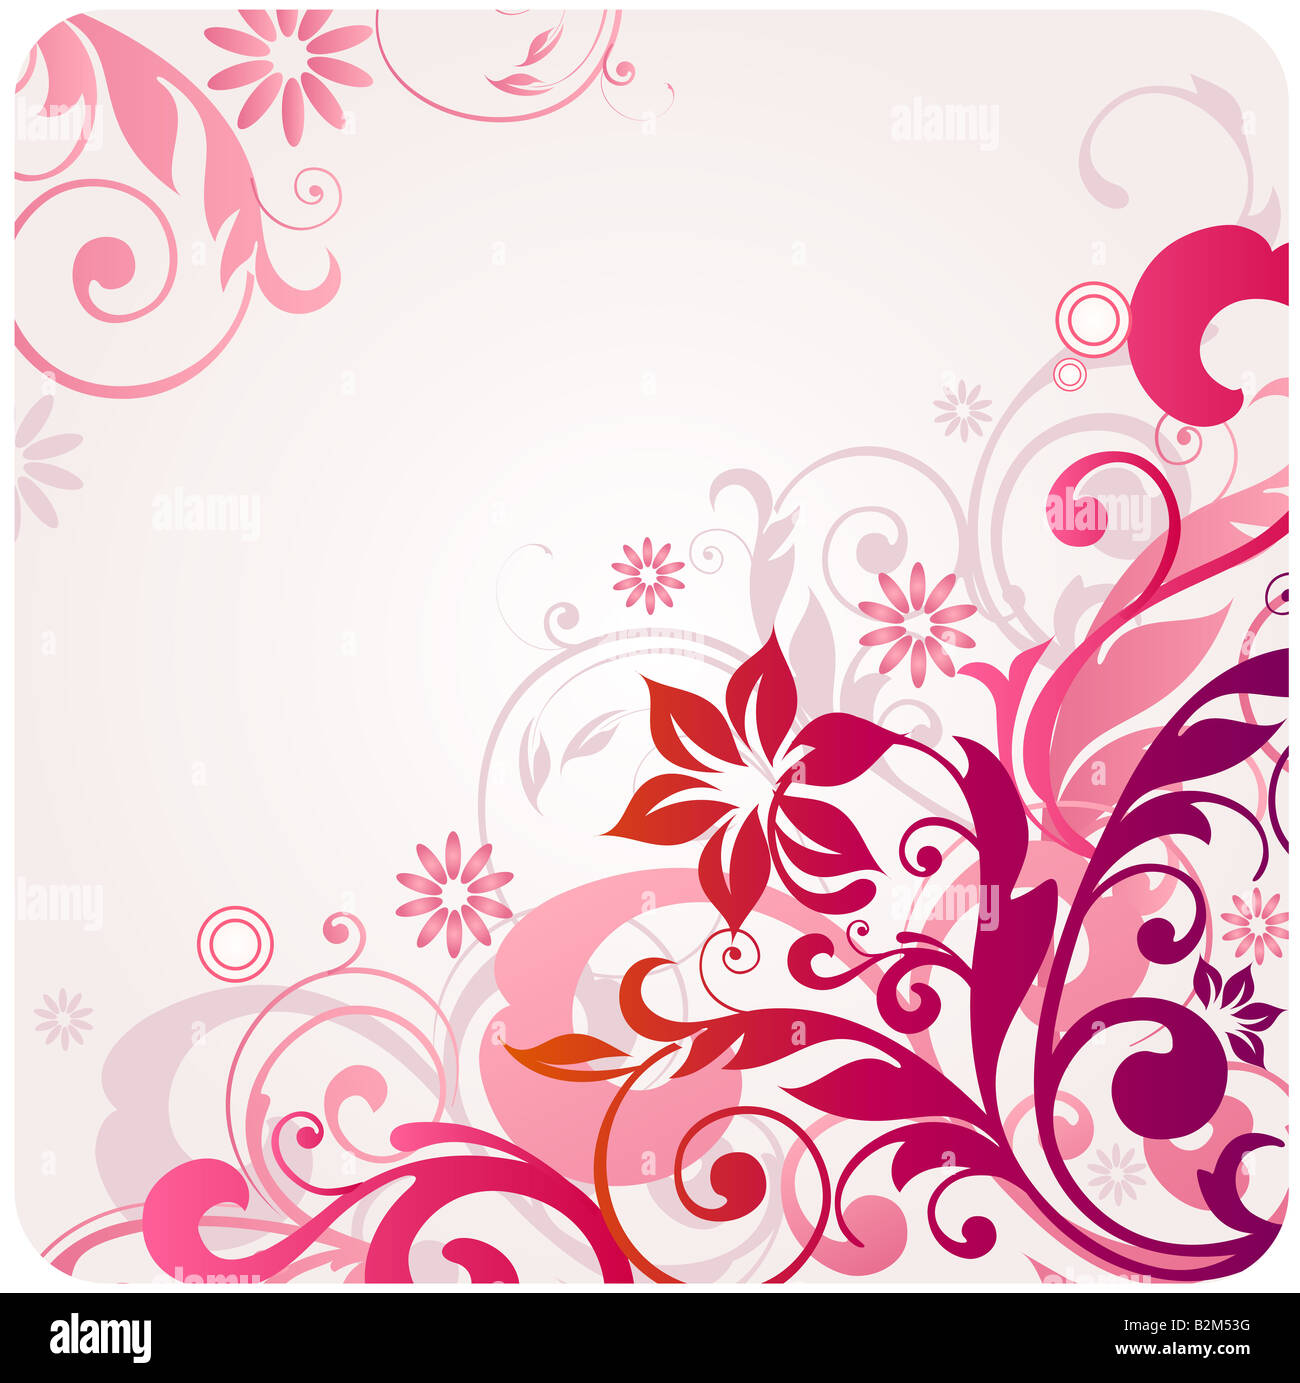 illustration drawing of floral background Stock Photo